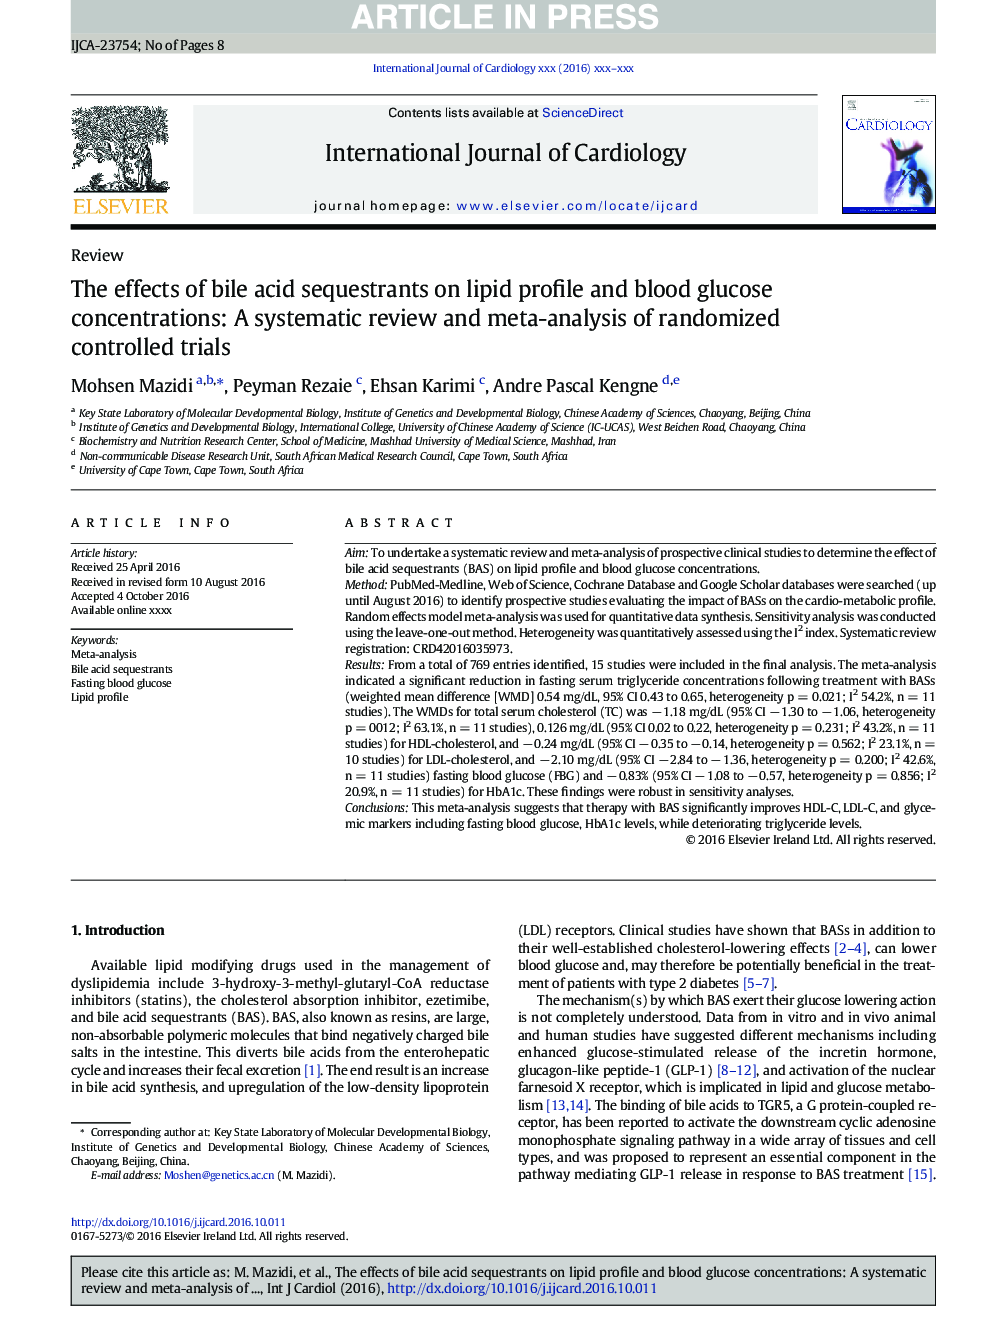 The effects of bile acid sequestrants on lipid profile and blood glucose concentrations: A systematic review and meta-analysis of randomized controlled trials